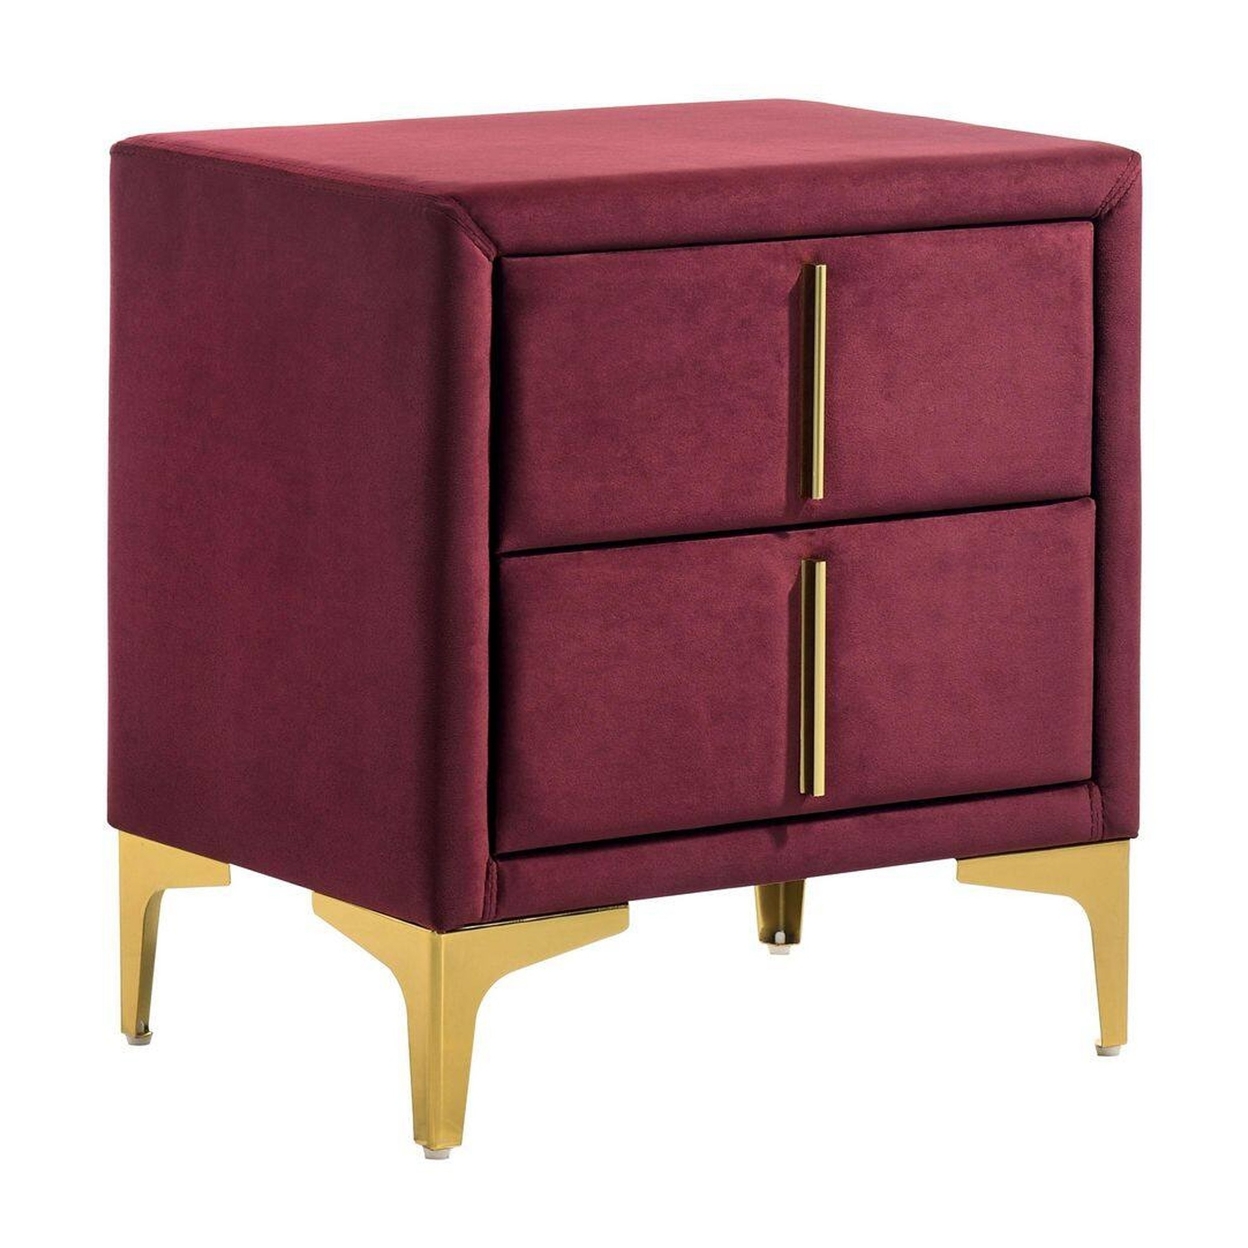 Bios 24 Inch Nightstand, 2 Drawers, Red Vegan Faux Leather, Gold Accents- Saltoro Sherpi